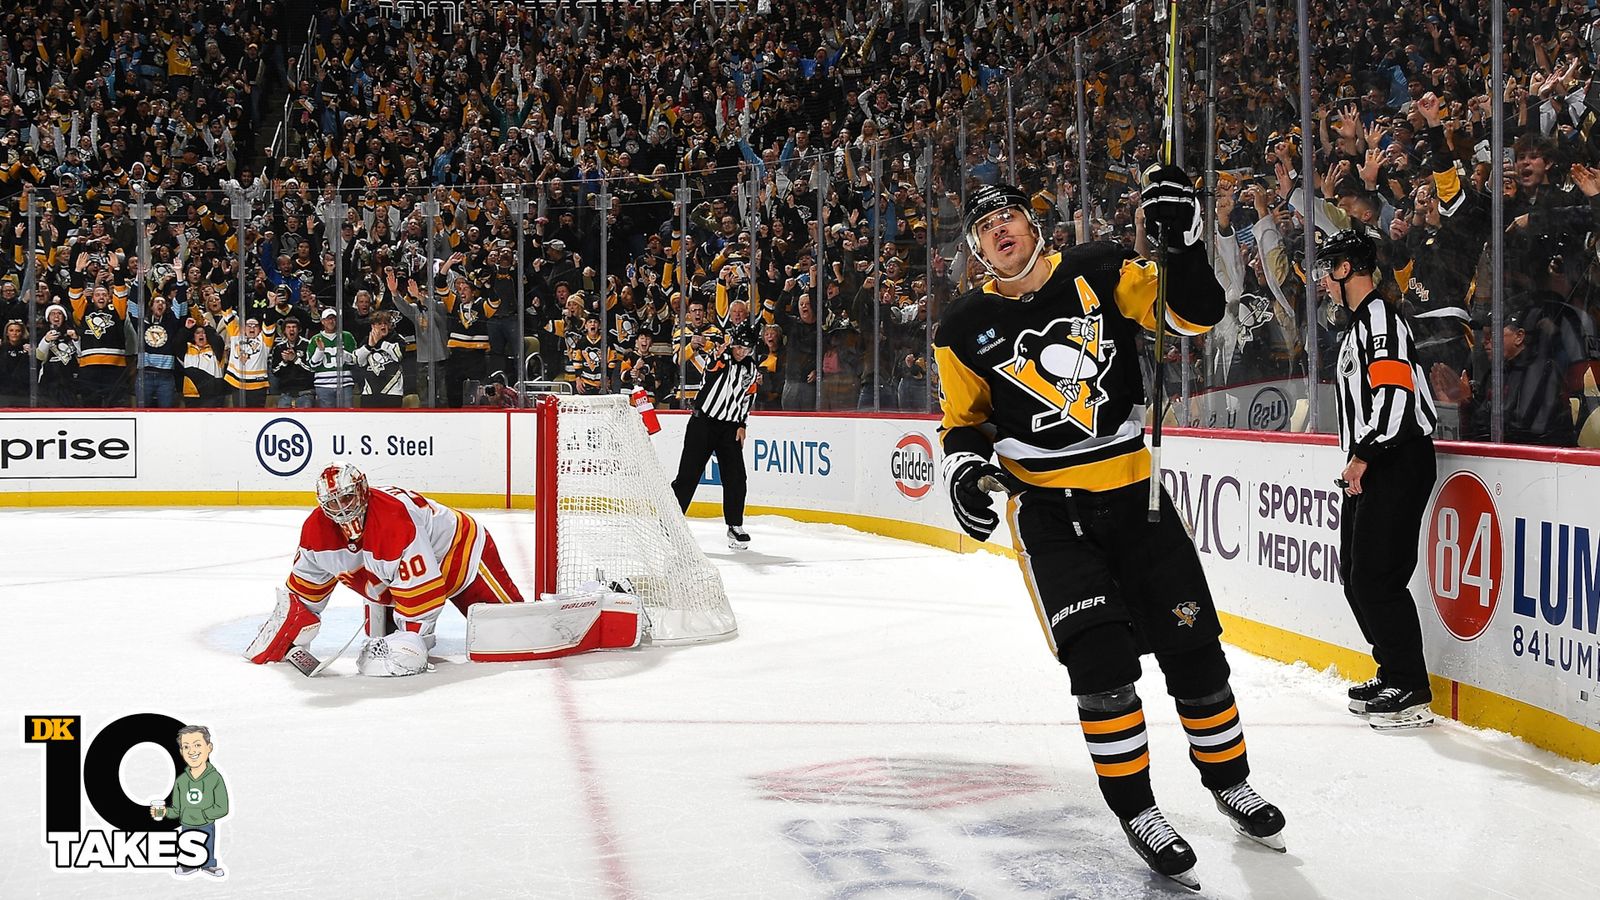 Pittsburgh Penguins Engeni Malkin acknowledges the fans during the